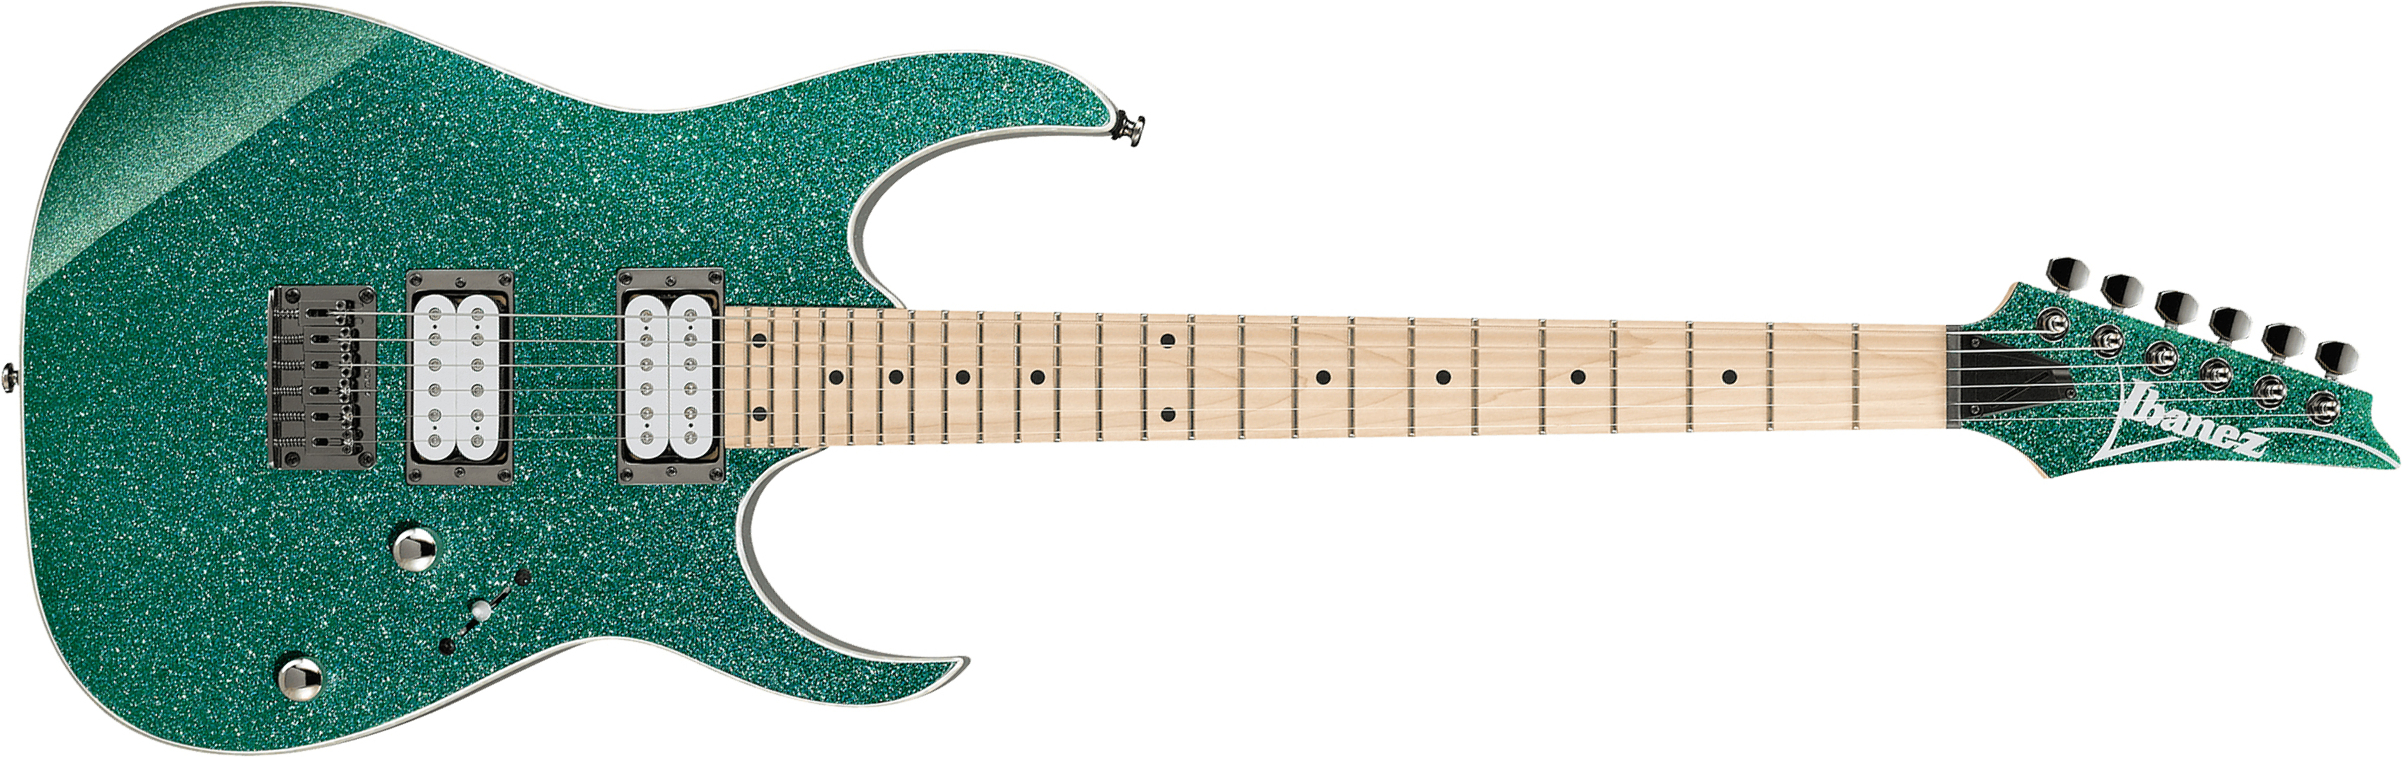 Ibanez Rg421msp Tsp Standard Ht Hh Mn - Turquoise Sparkle - Str shape electric guitar - Main picture